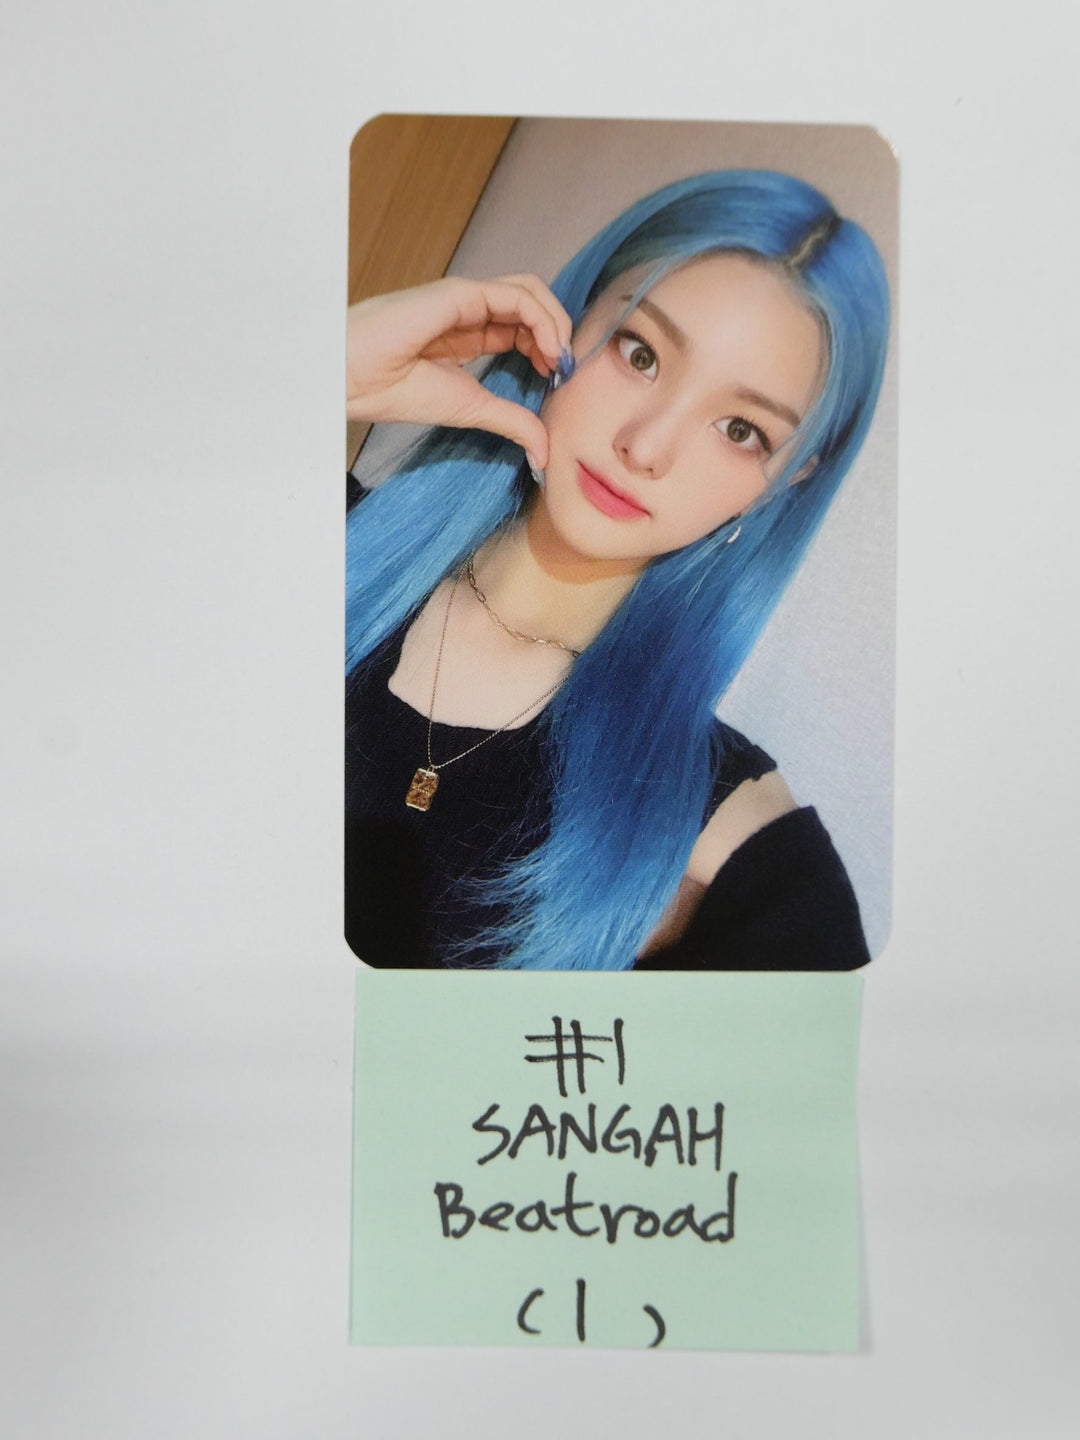 Lightsum 'Light a Wish' - Beatroad Fansign Event Photocard